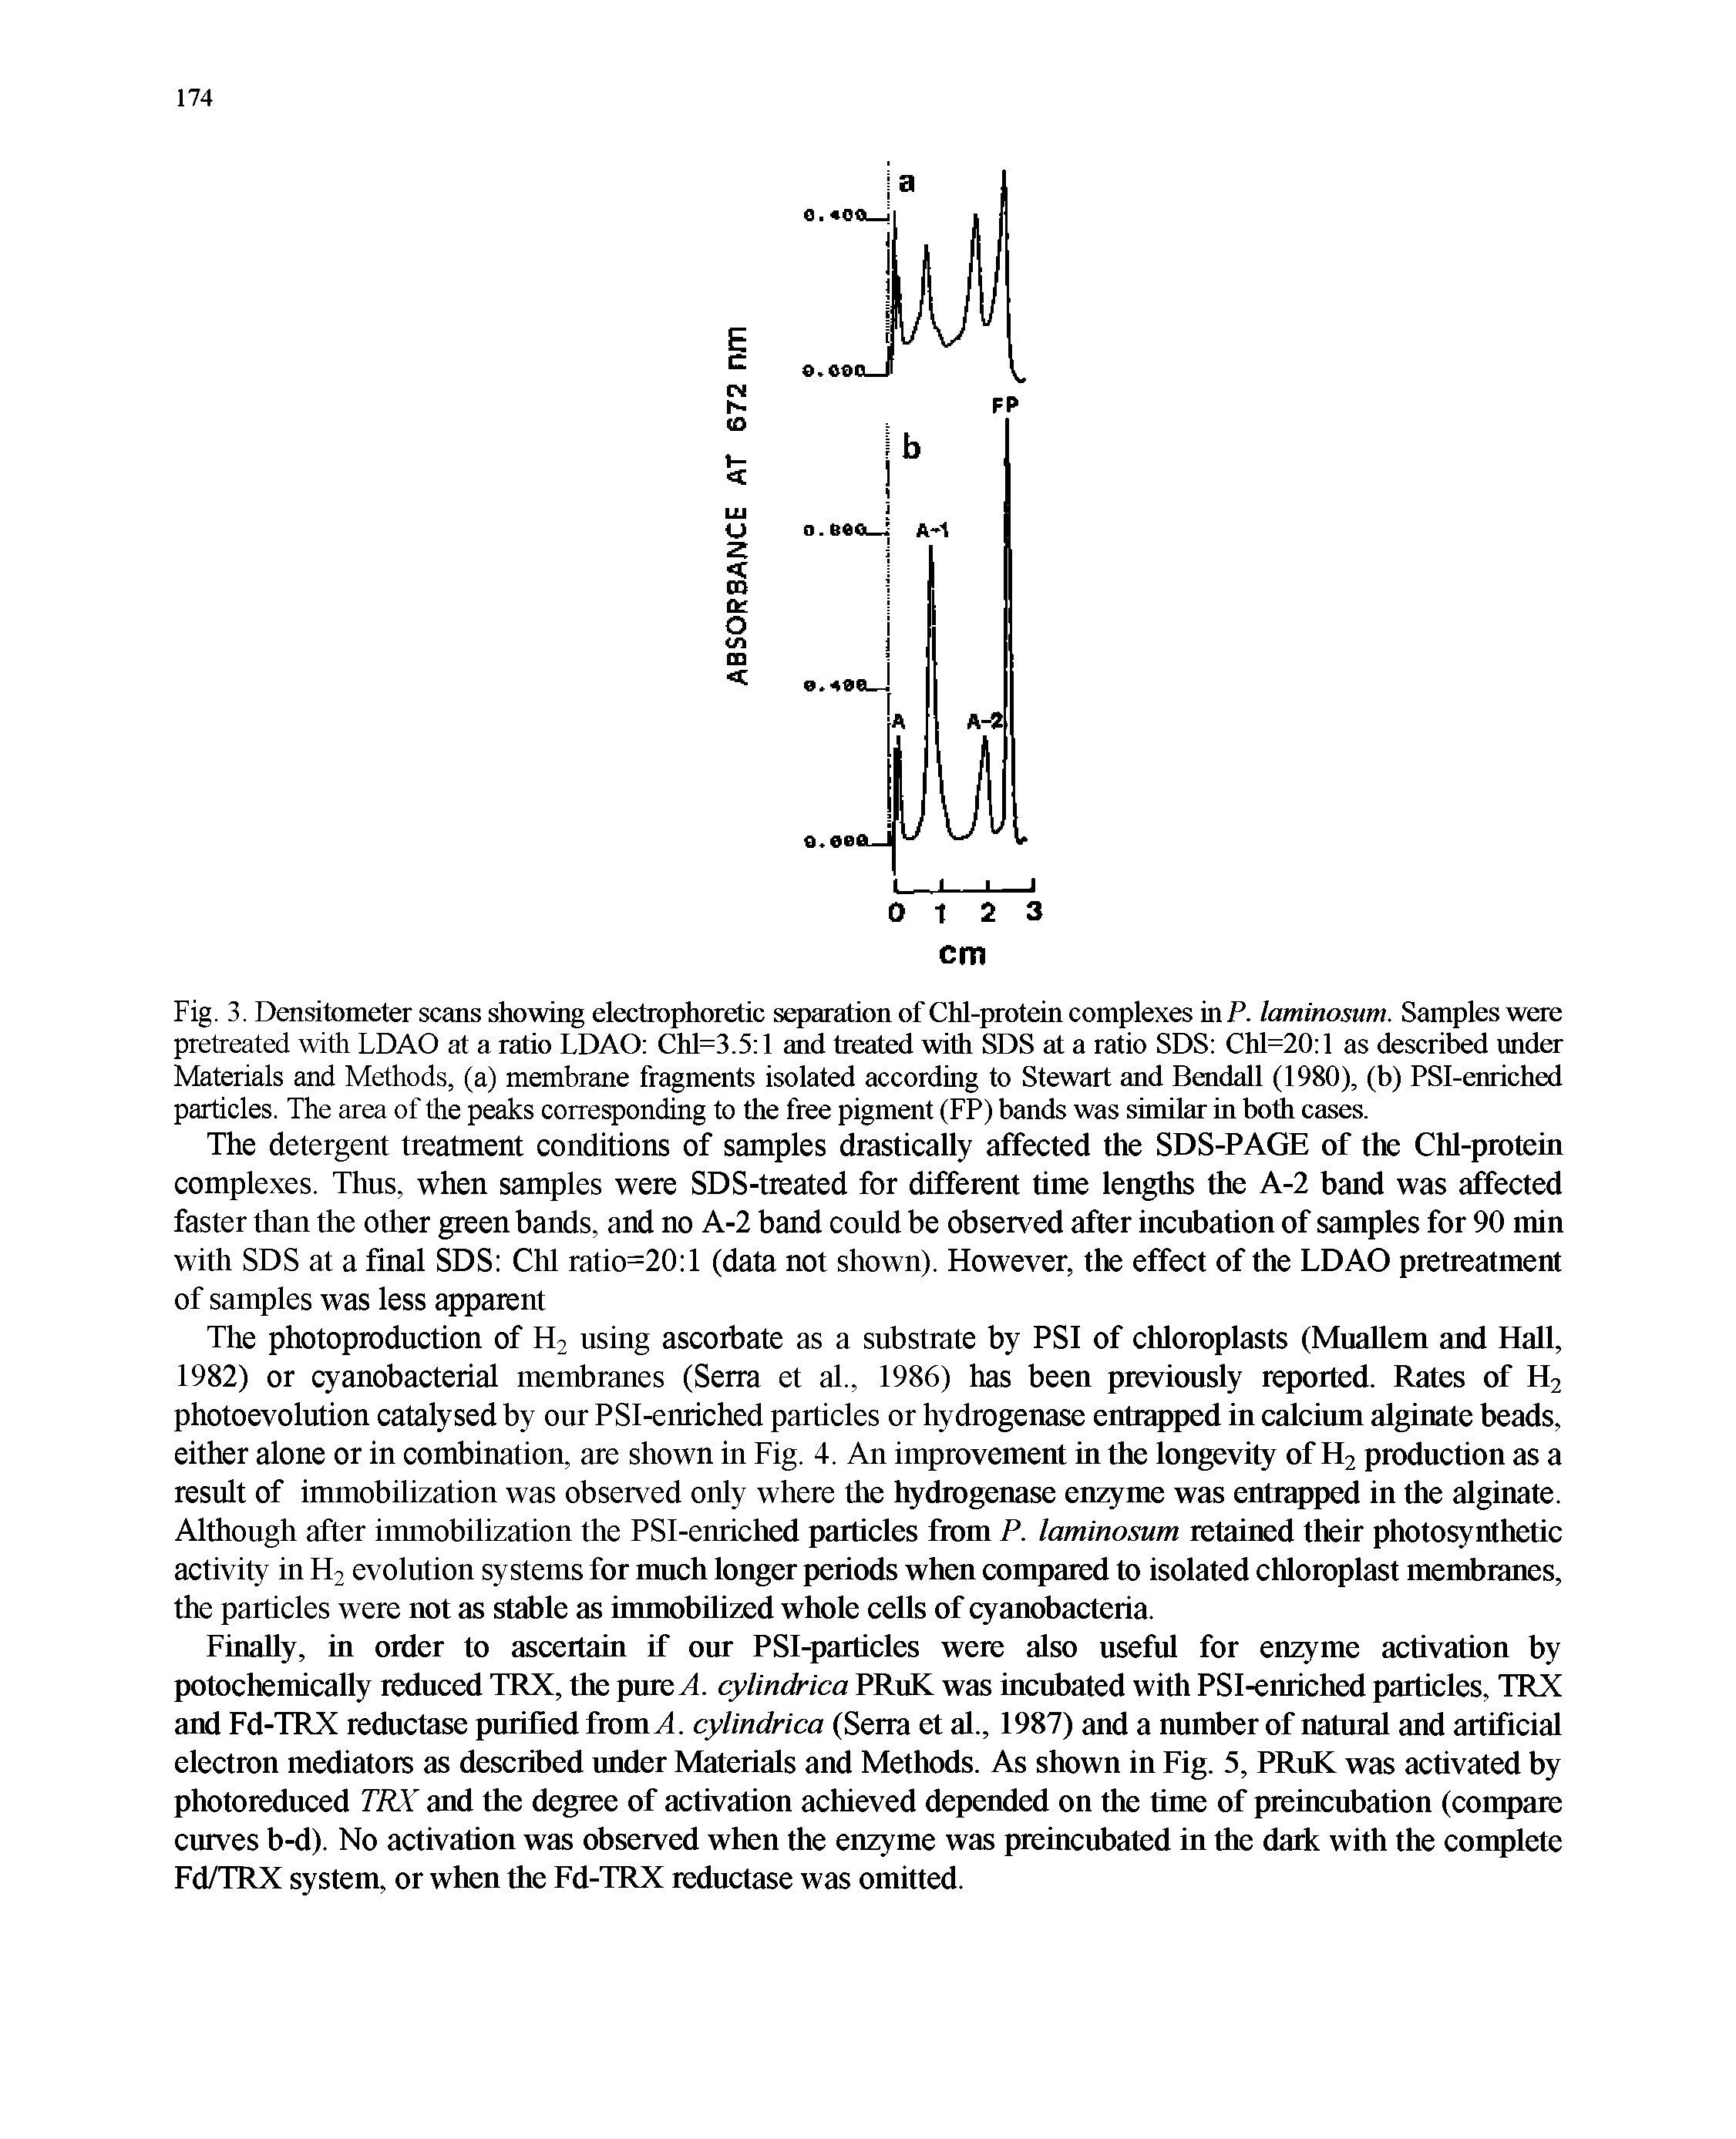 Fig. 3. Densitometer scans showing electrophoretic separation of Chl-protein complexes in P. laminosum. Samples were pretreated with LDAO at a ratio LDAO Chl=3.5 l and treated with SDS at a ratio SDS Chl=20 l as described under Materials and Methods, (a) membrane fragments isolated according to Stewart and Bendall (1980), (b) PSI-enriched particles. The area of the peaks corresponding to the free pigment (FP) bands was similar in both cases.